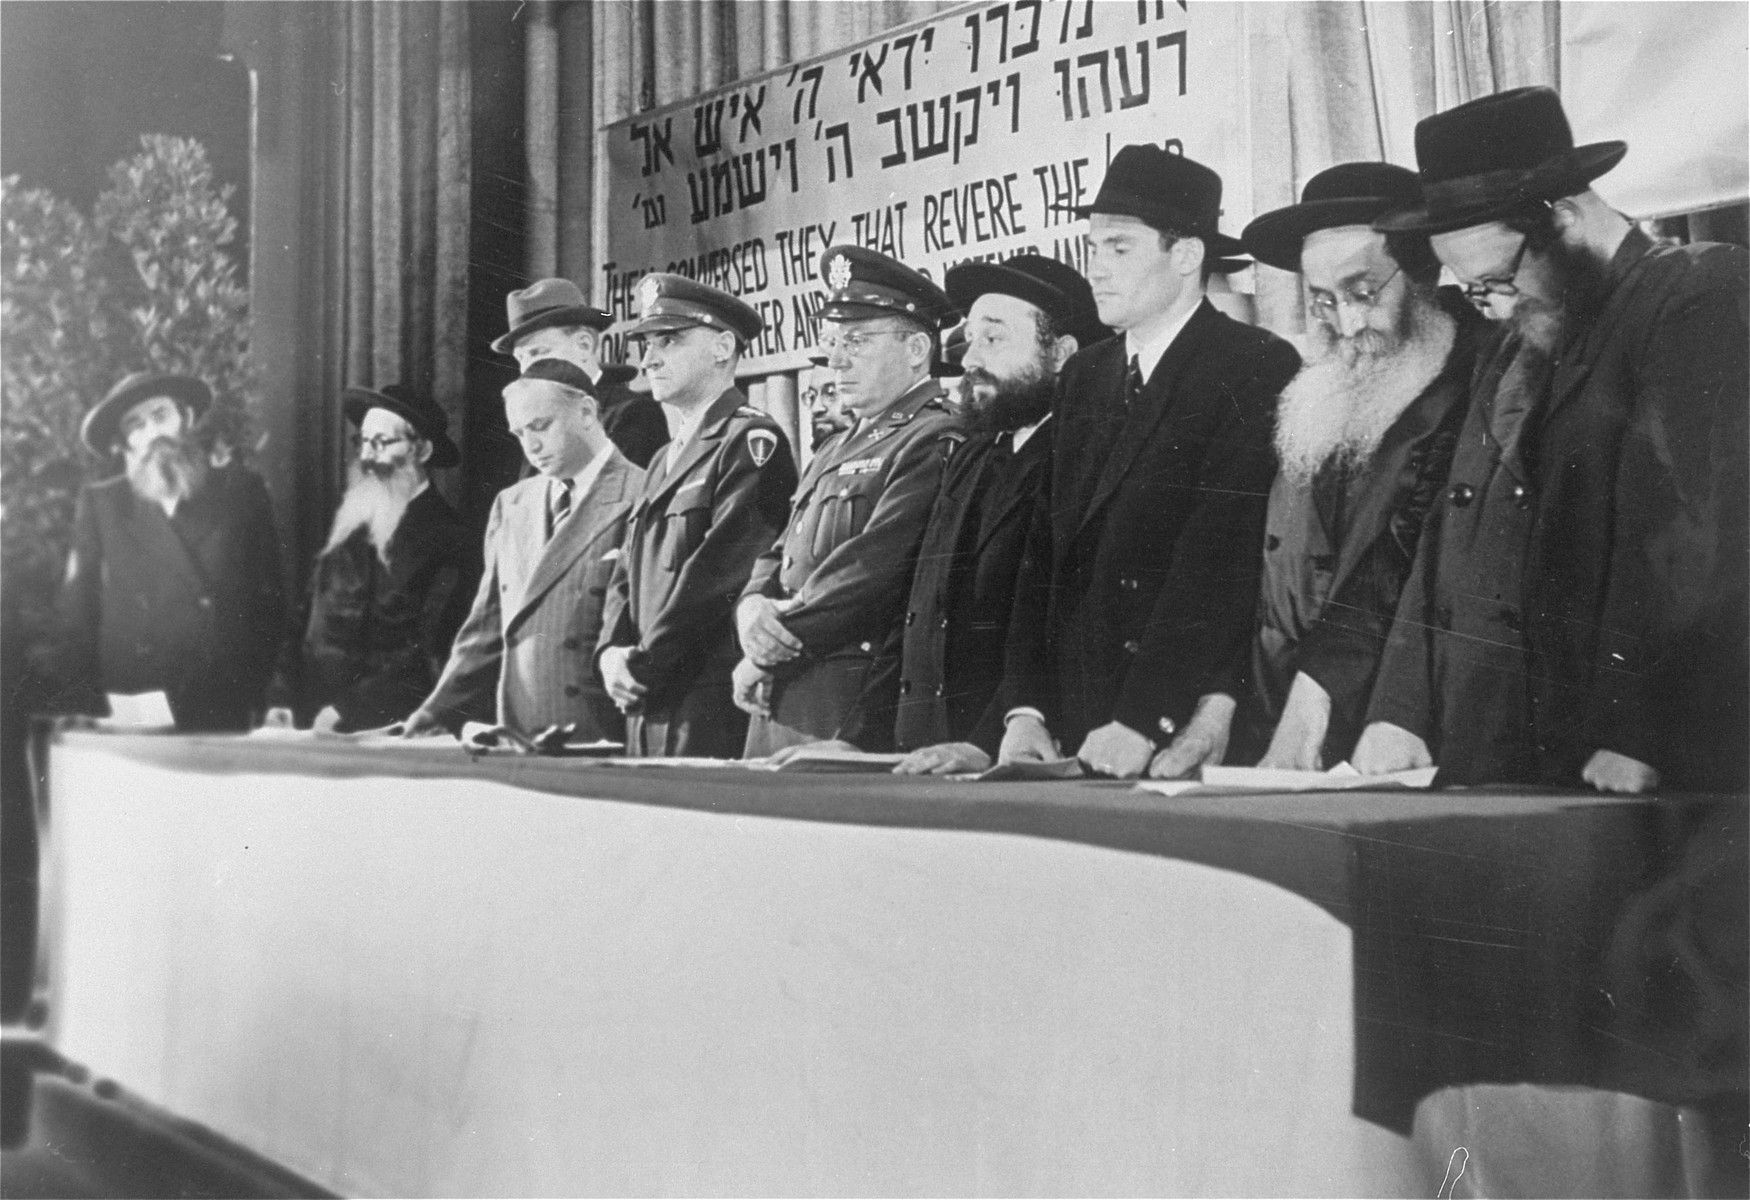 American military officers stand at the dais with a group of orthodox rabbis at a DP conference in Frankfurt.